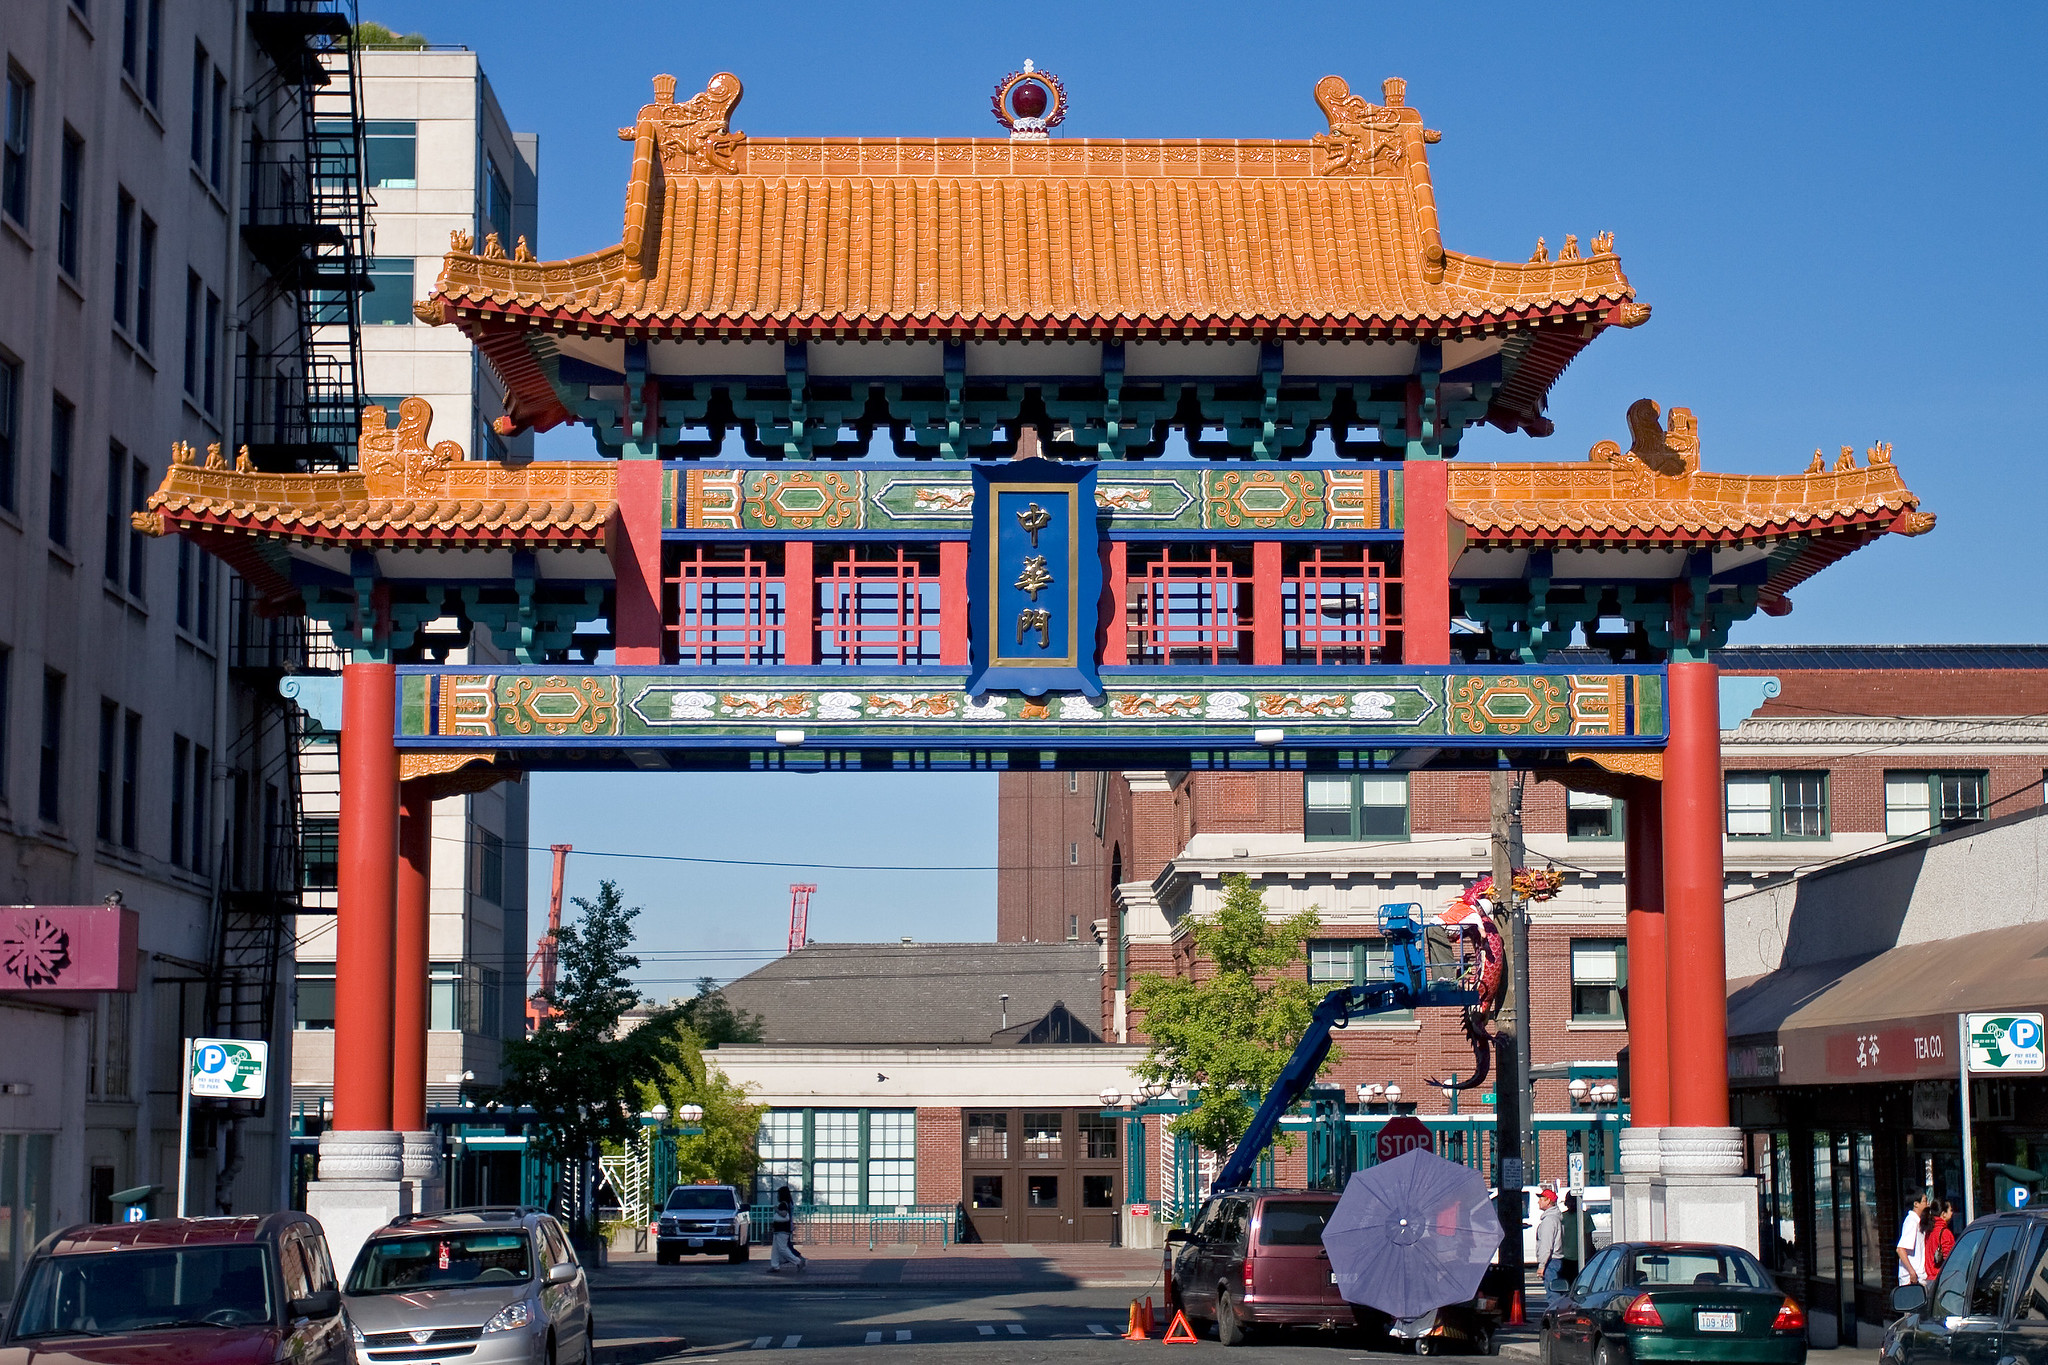 The Chinatown Gate. Photo credit to the Seattle Department of Neighborhoods.